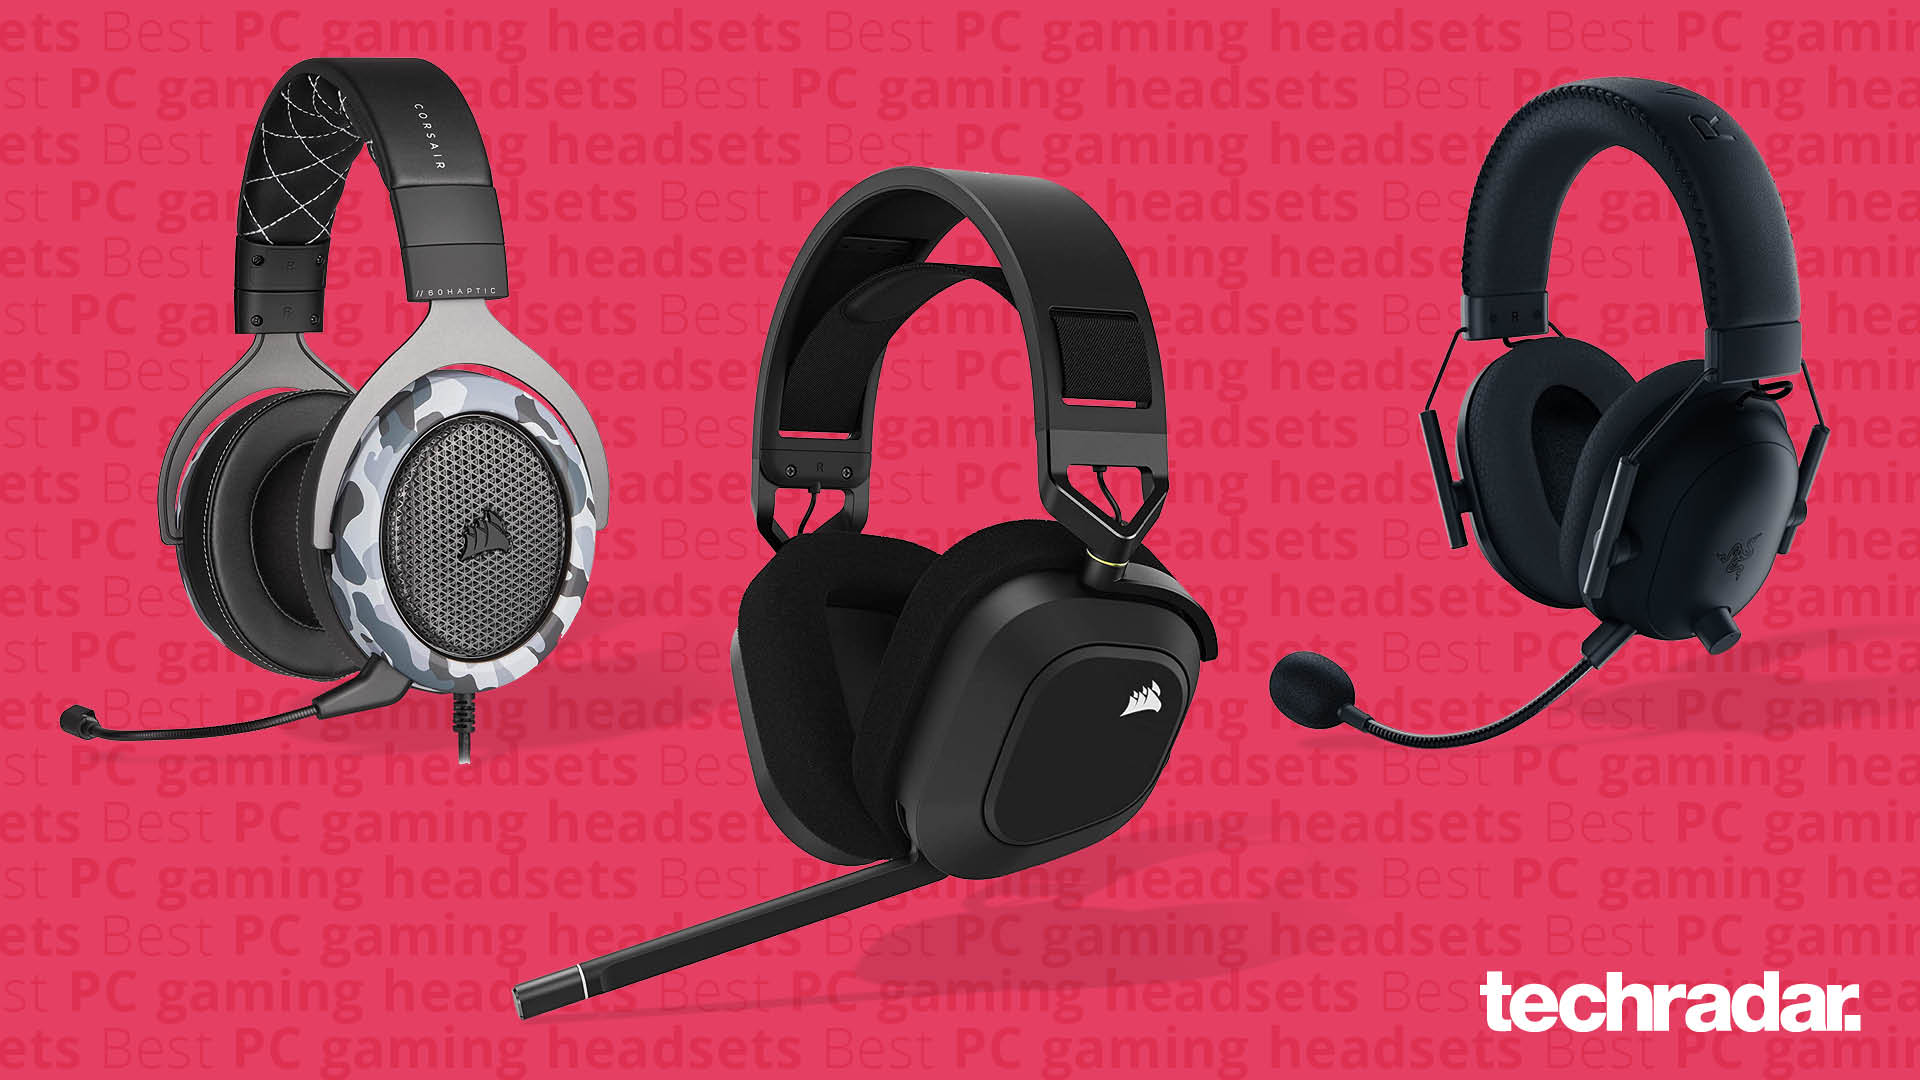 Simple Best Work And Gaming Headset With Cozy Design